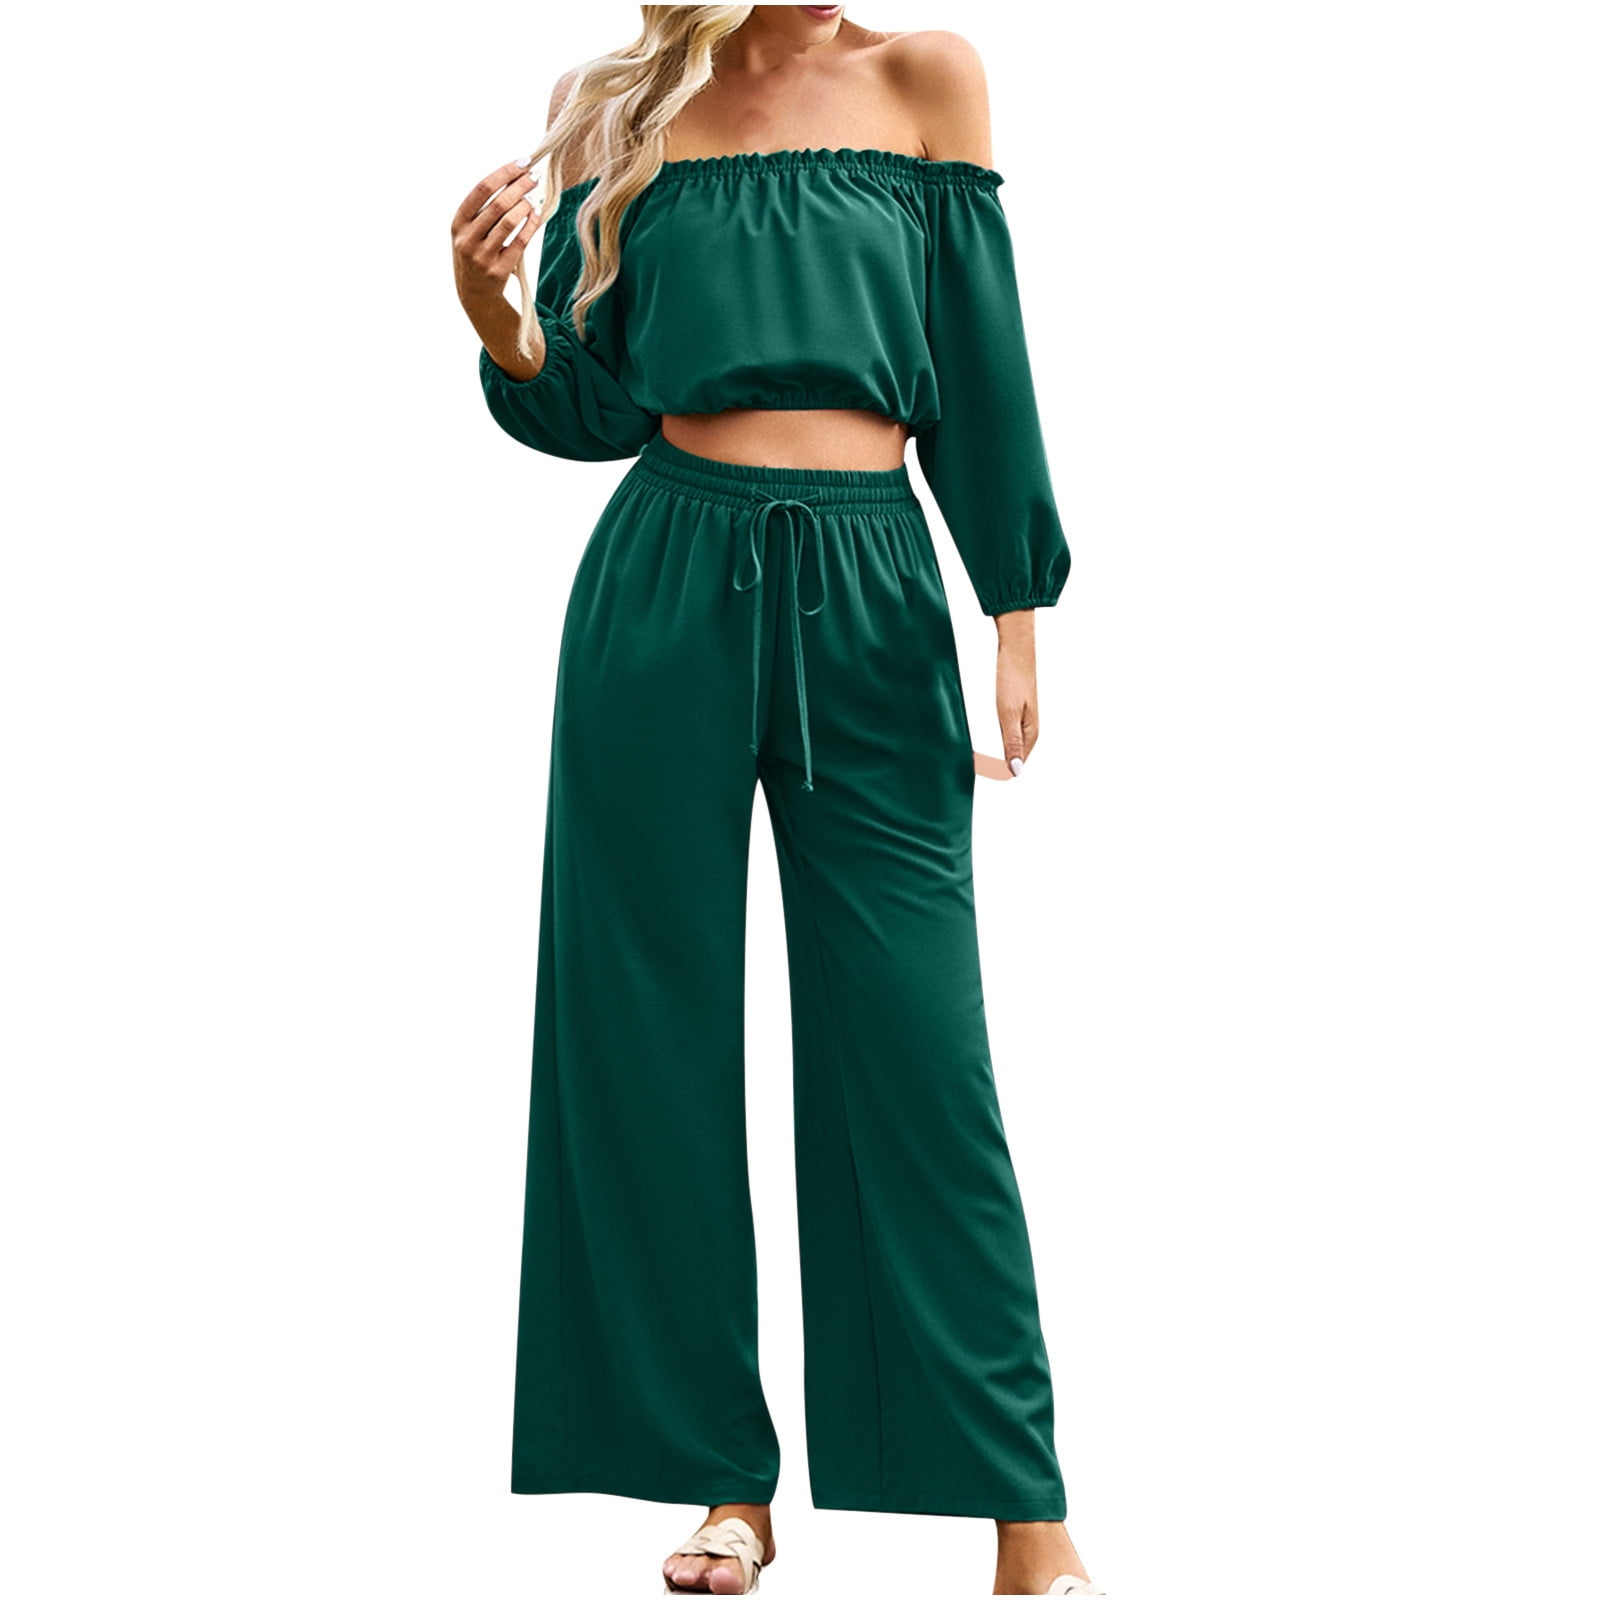 SheIn Women's 2 Piece Pants Outfits One Shoulder Crop Tank Top and